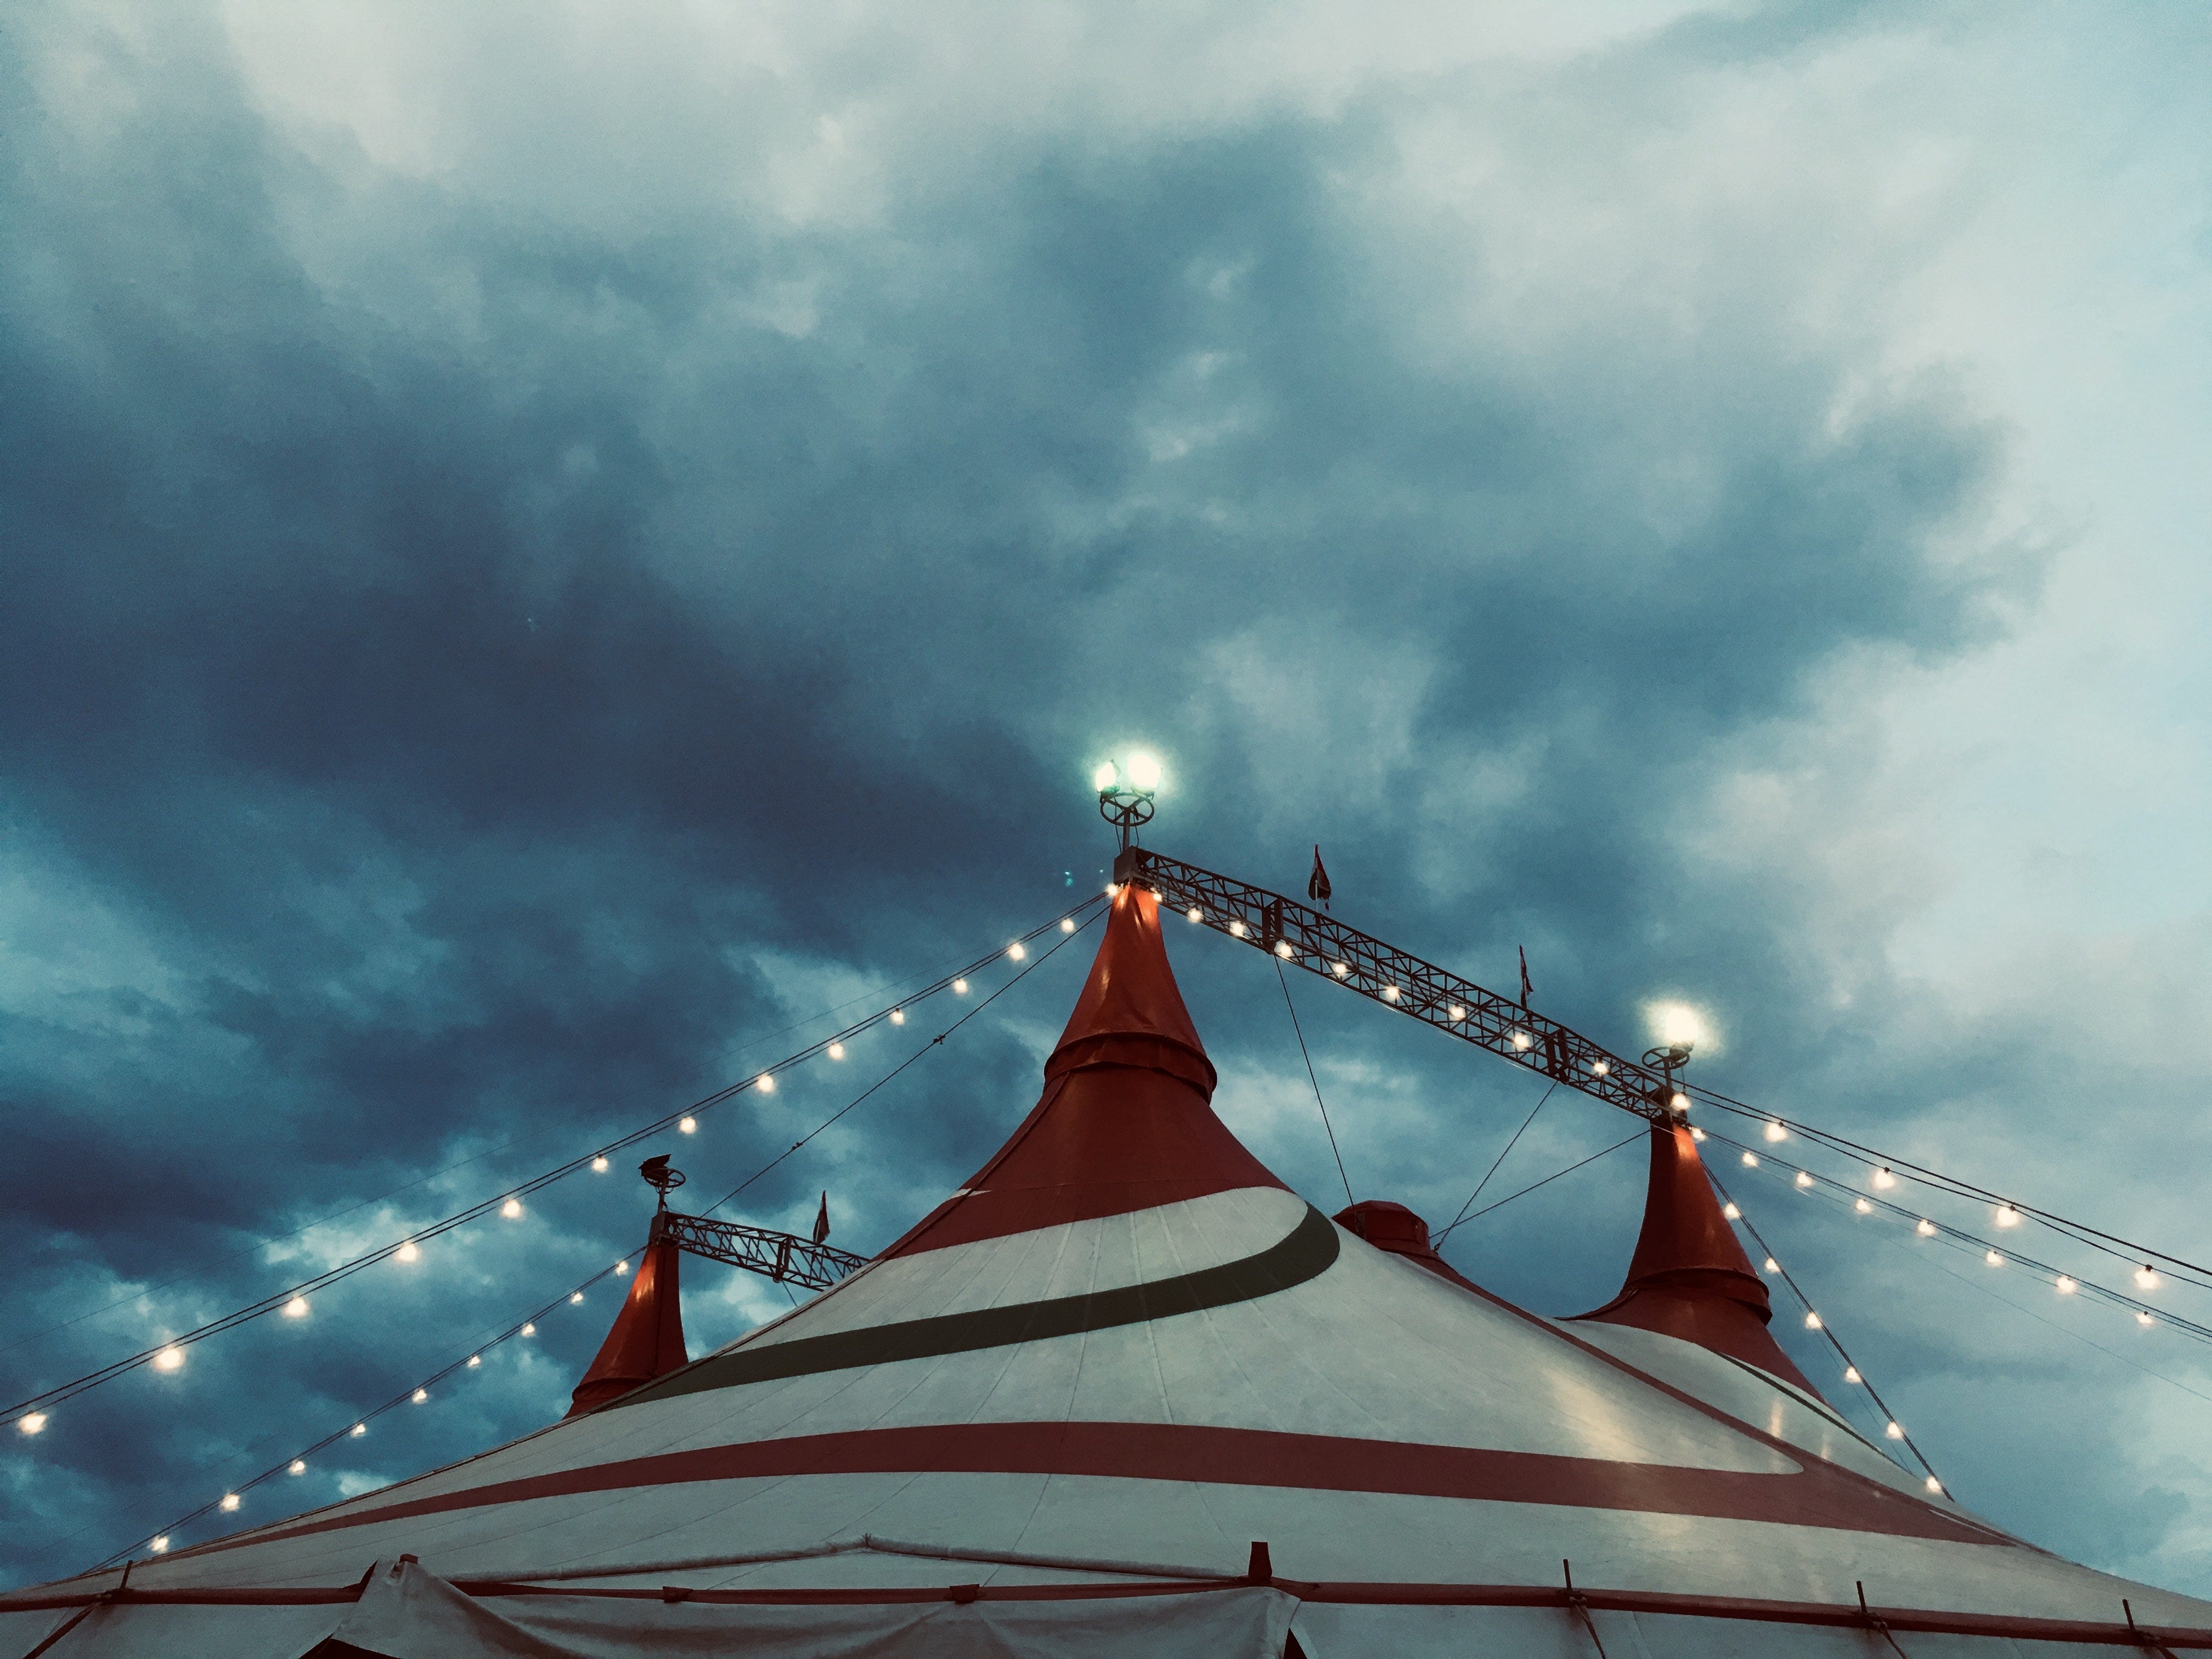 Under the Circus Tent. A Poem | by Enne Baker | White Objects | Medium